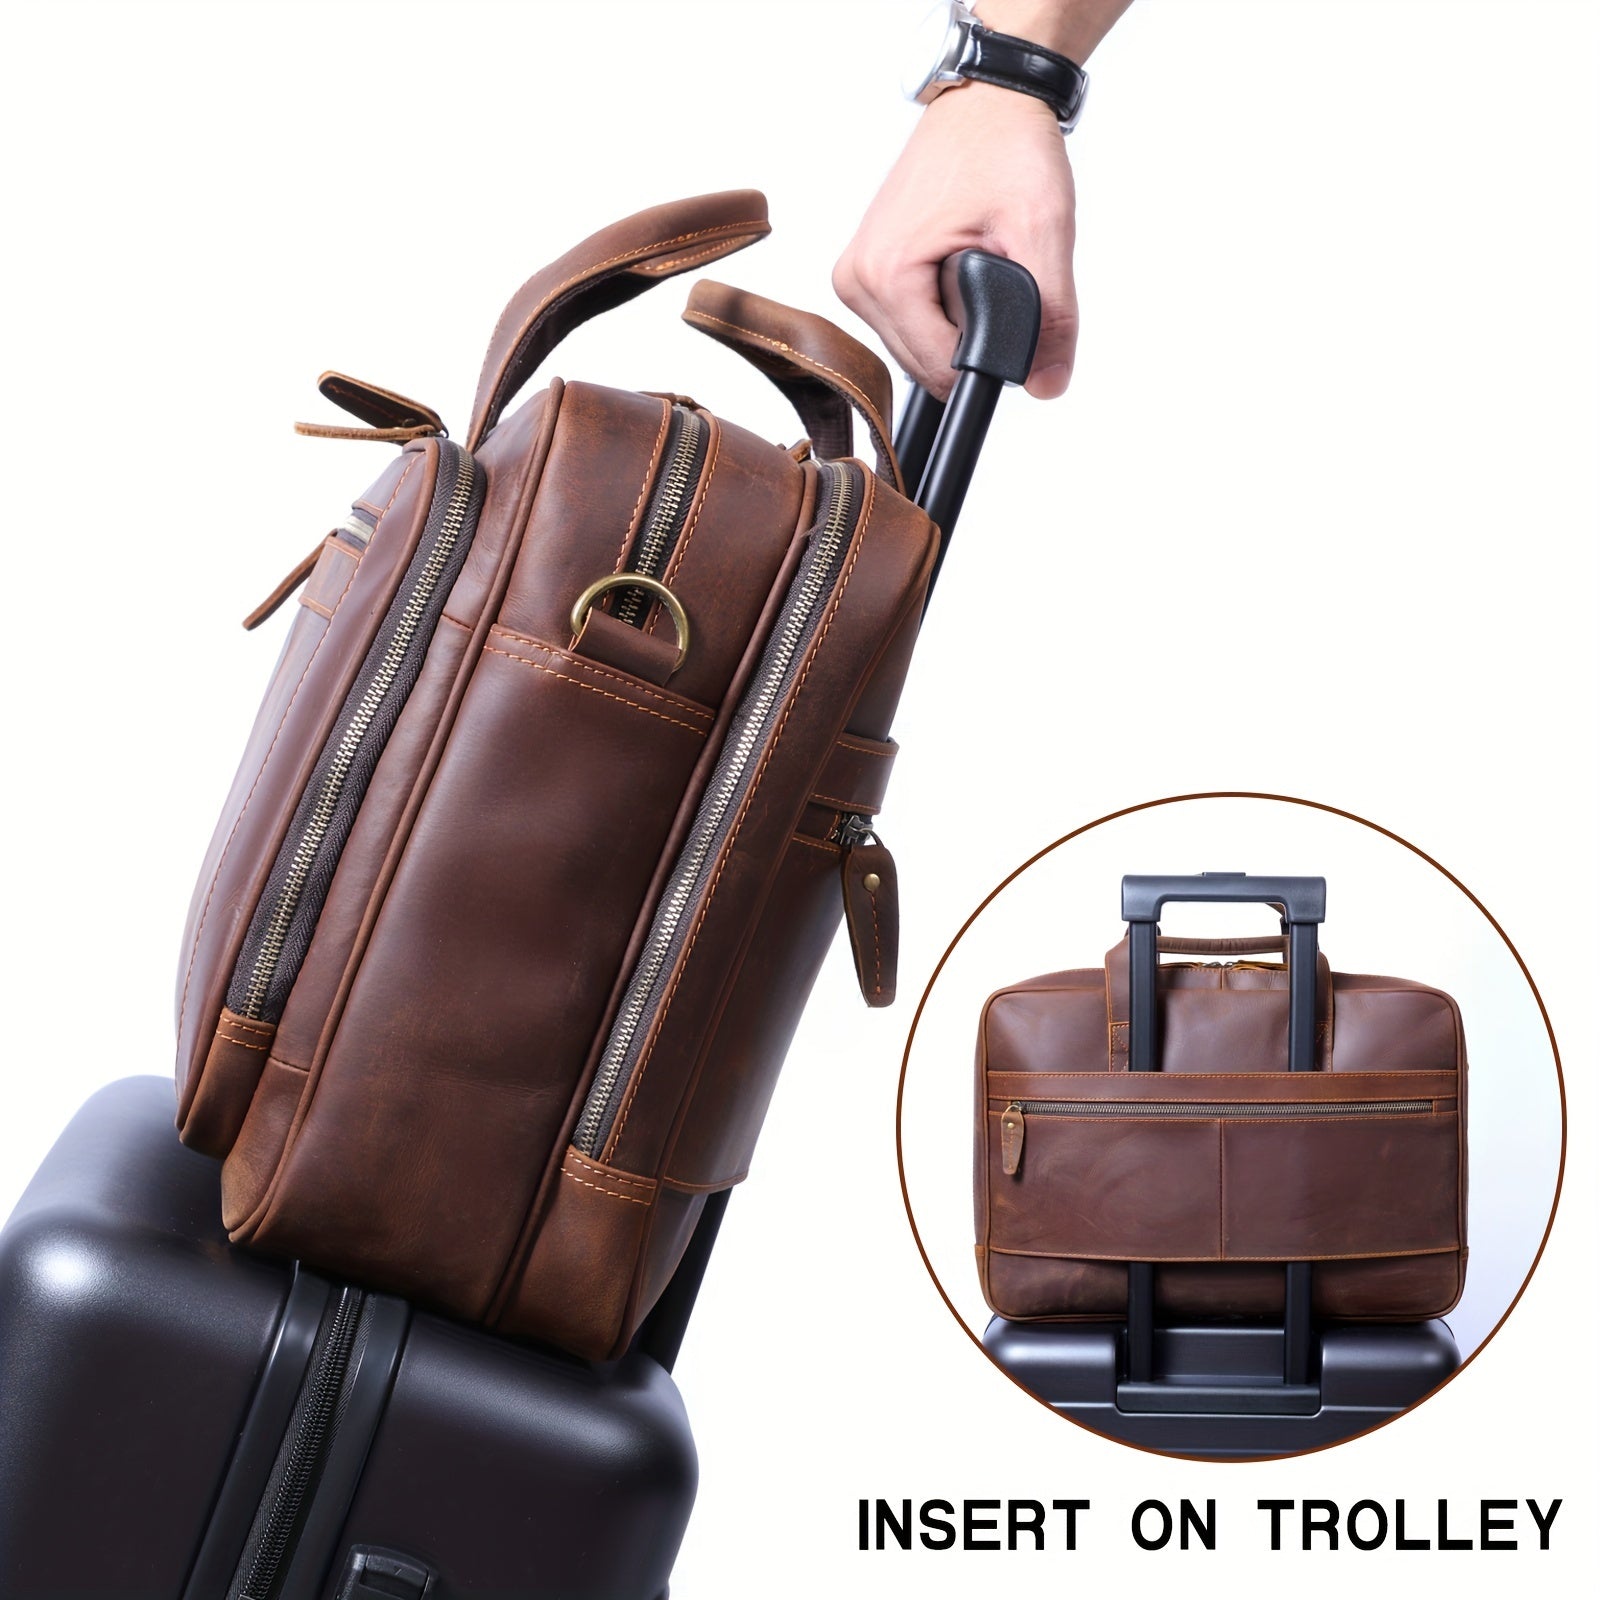 Vintage Men's Leather Business Travel Briefcase Fits 43.18 cm Laptop Messenger Bag Genuine Leather Briefcase Handbag Duffel Bags For Men, Ideal choice for Gifts , School bags, Valentines Gifts